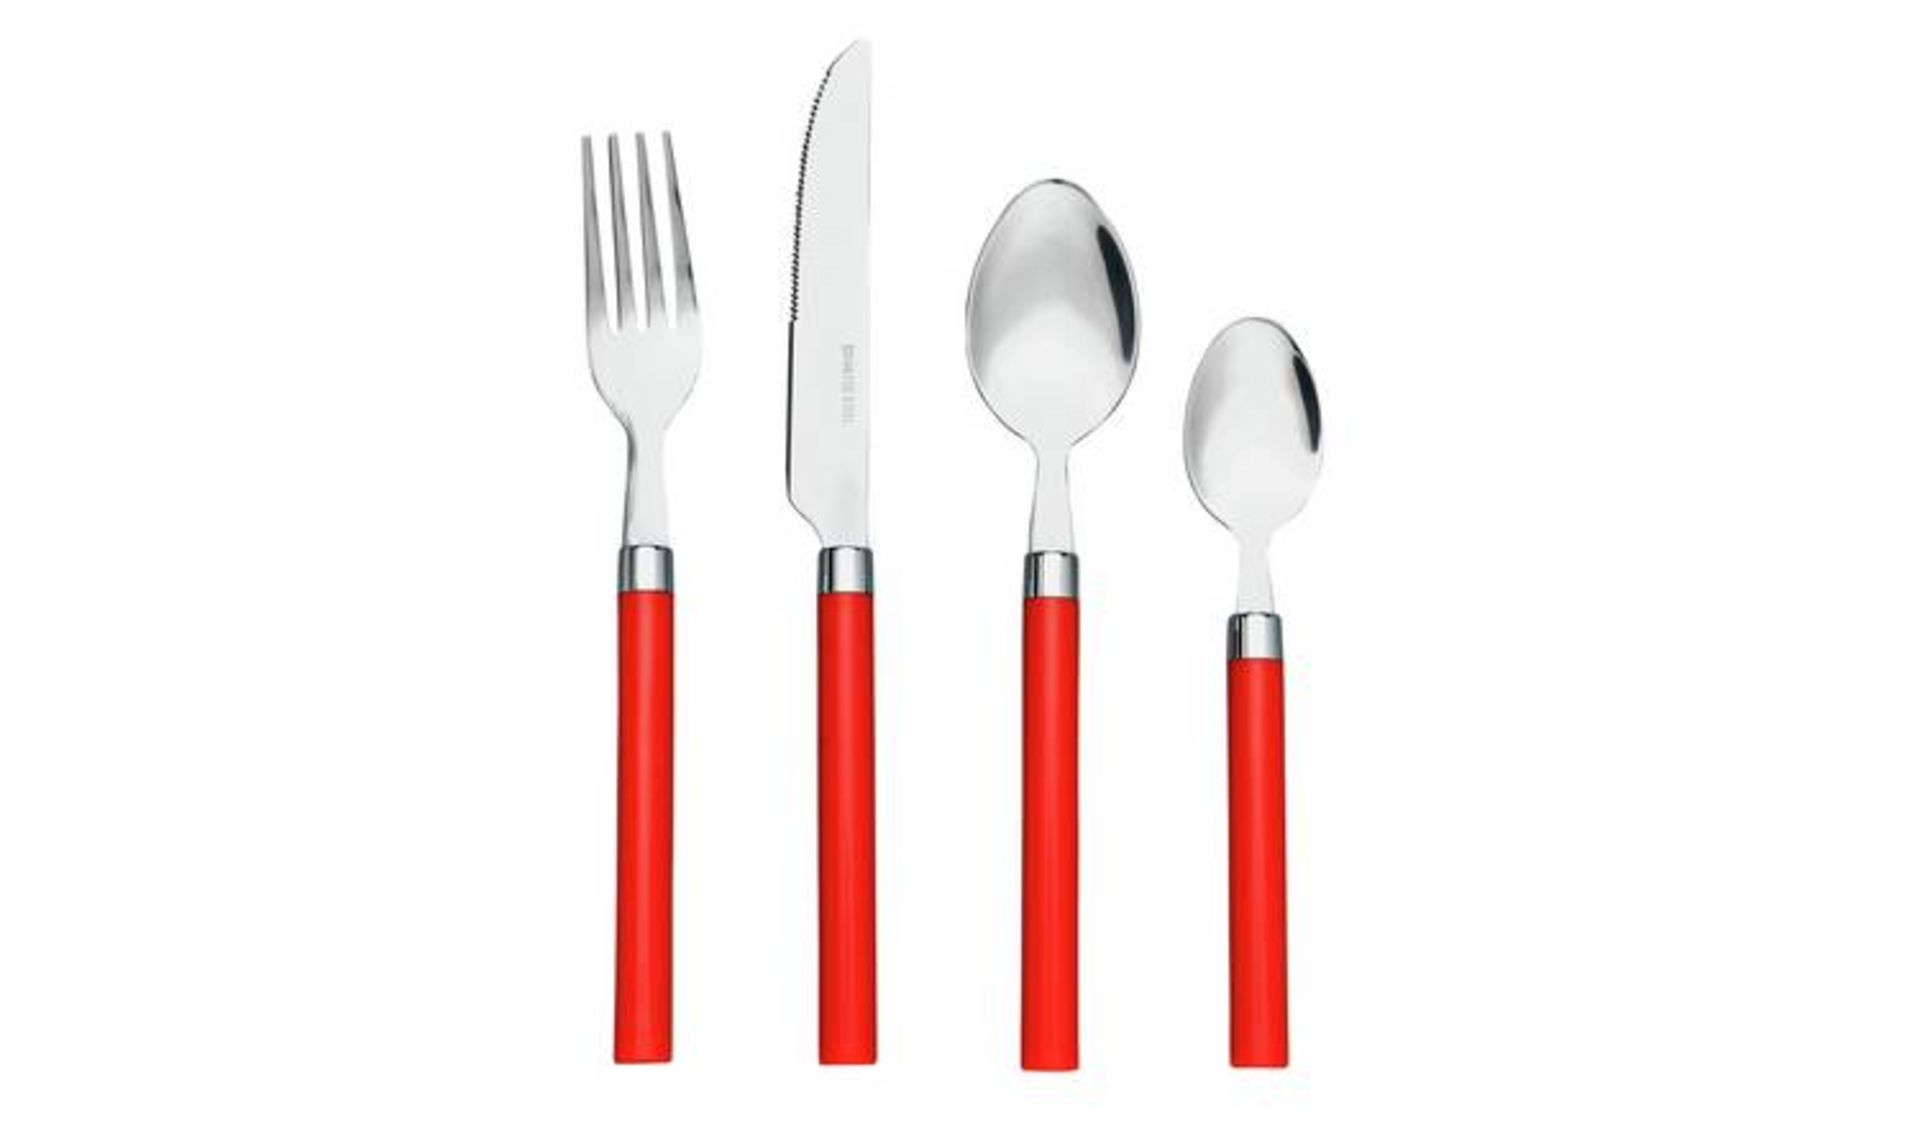 6 X BRAND NEW 16 PIECE LUXURY CUTLERY SETS RED HANDLE R5-3 - Image 3 of 3